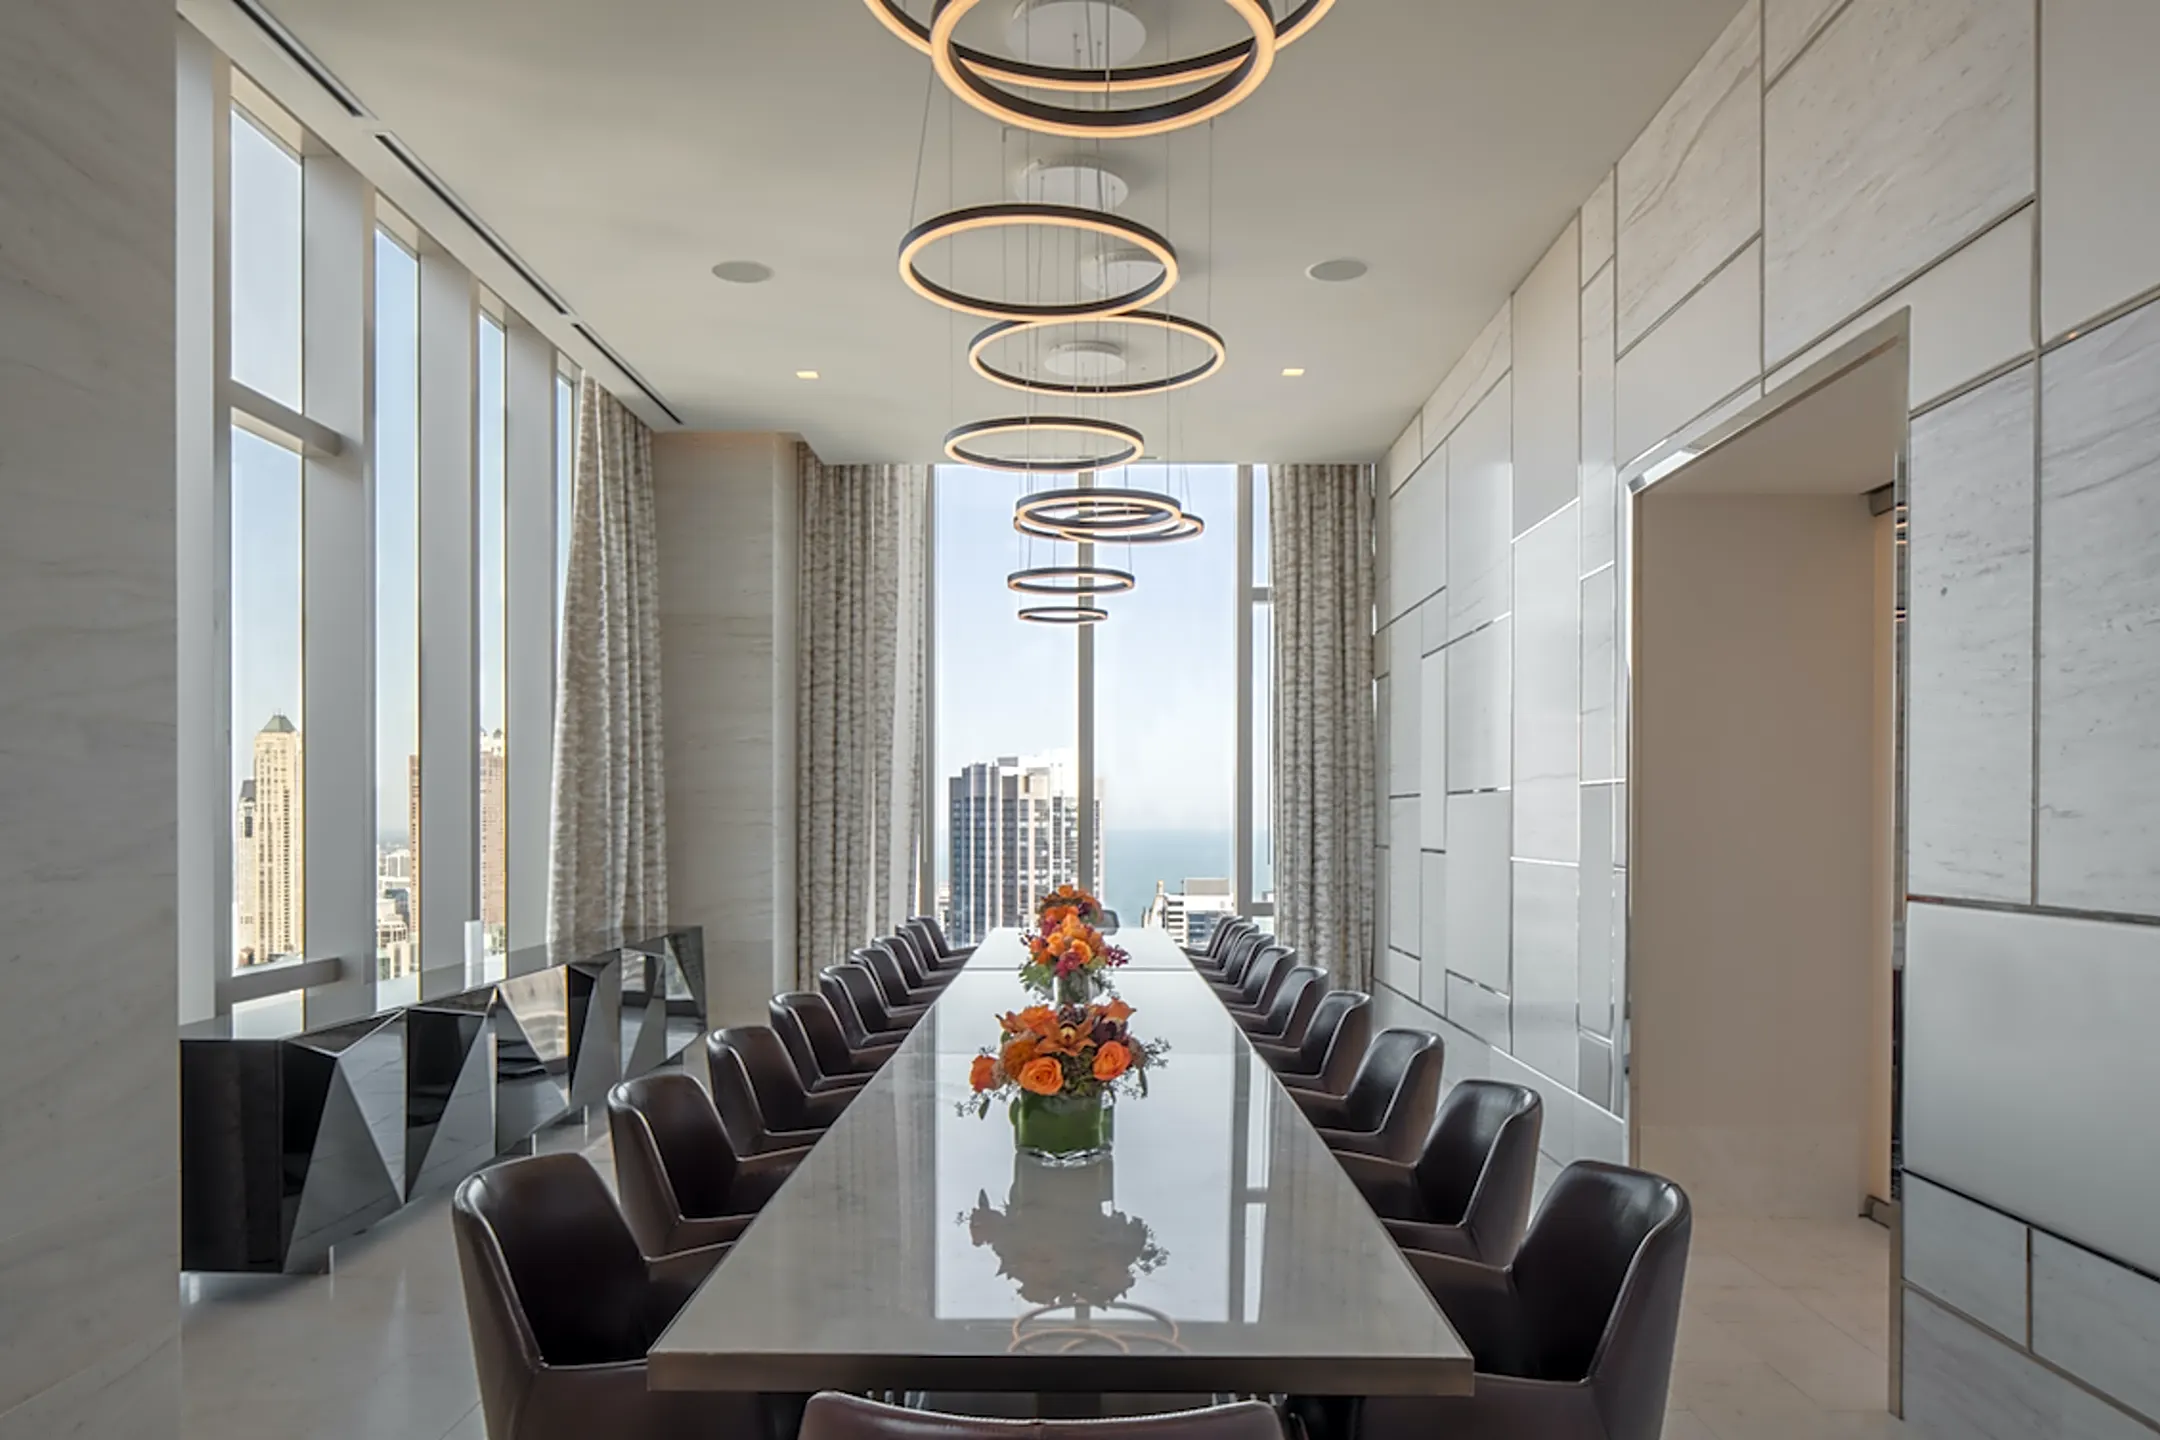 Dining Room - 363 East Wacker Drive - Chicago, IL